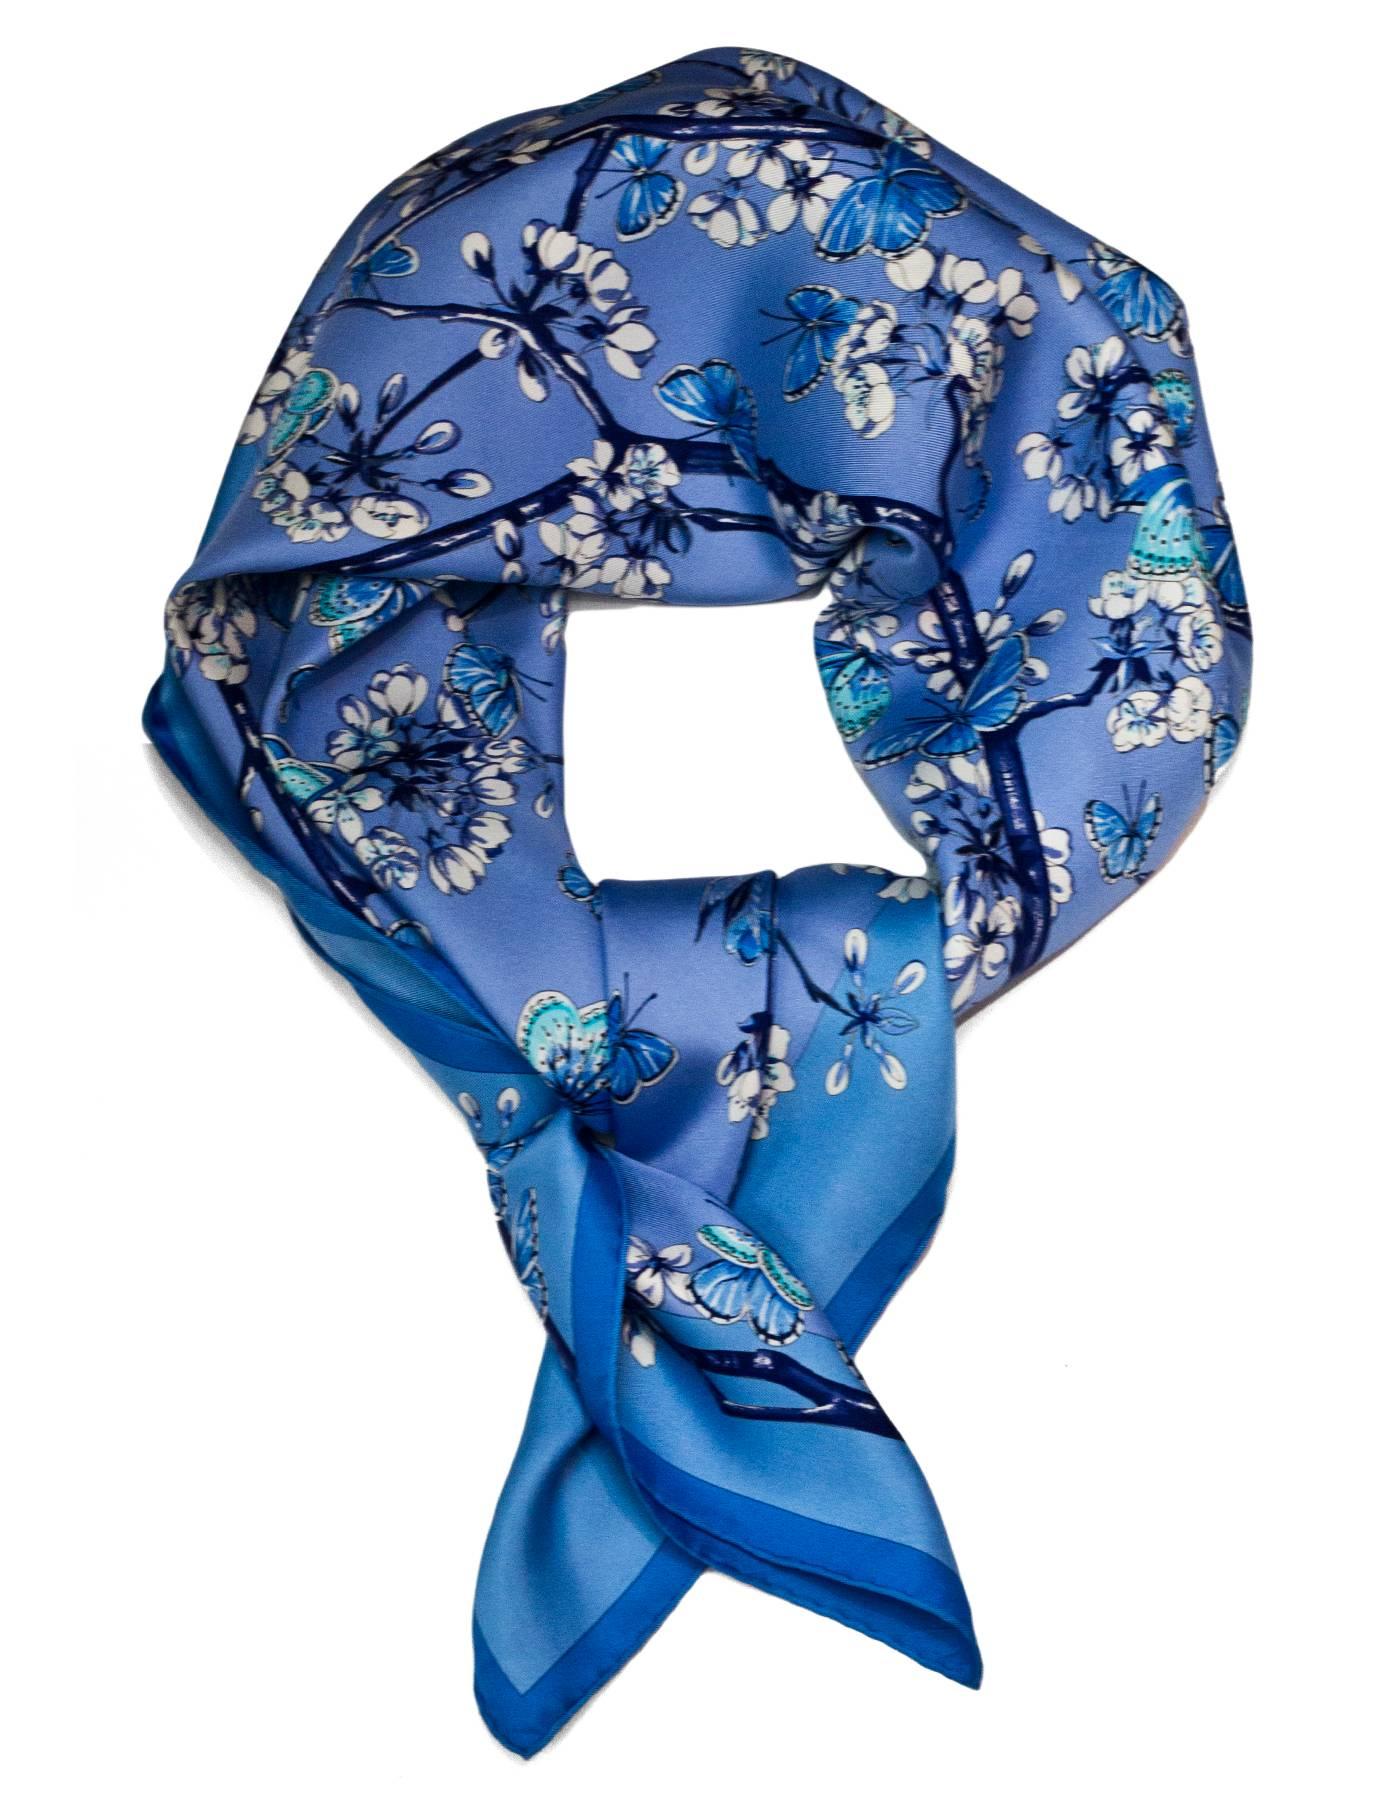 Hermes Blue & White Vol Amoureux des Azures Silk 90cm Scarf

Made In: France
Color: Blue, white
Composition: 100% Silk
Retail Price: $395 + tax
Overall Condition: Excellent pre-owned condition
Included: Hermes box

Measurements:
Length: 35